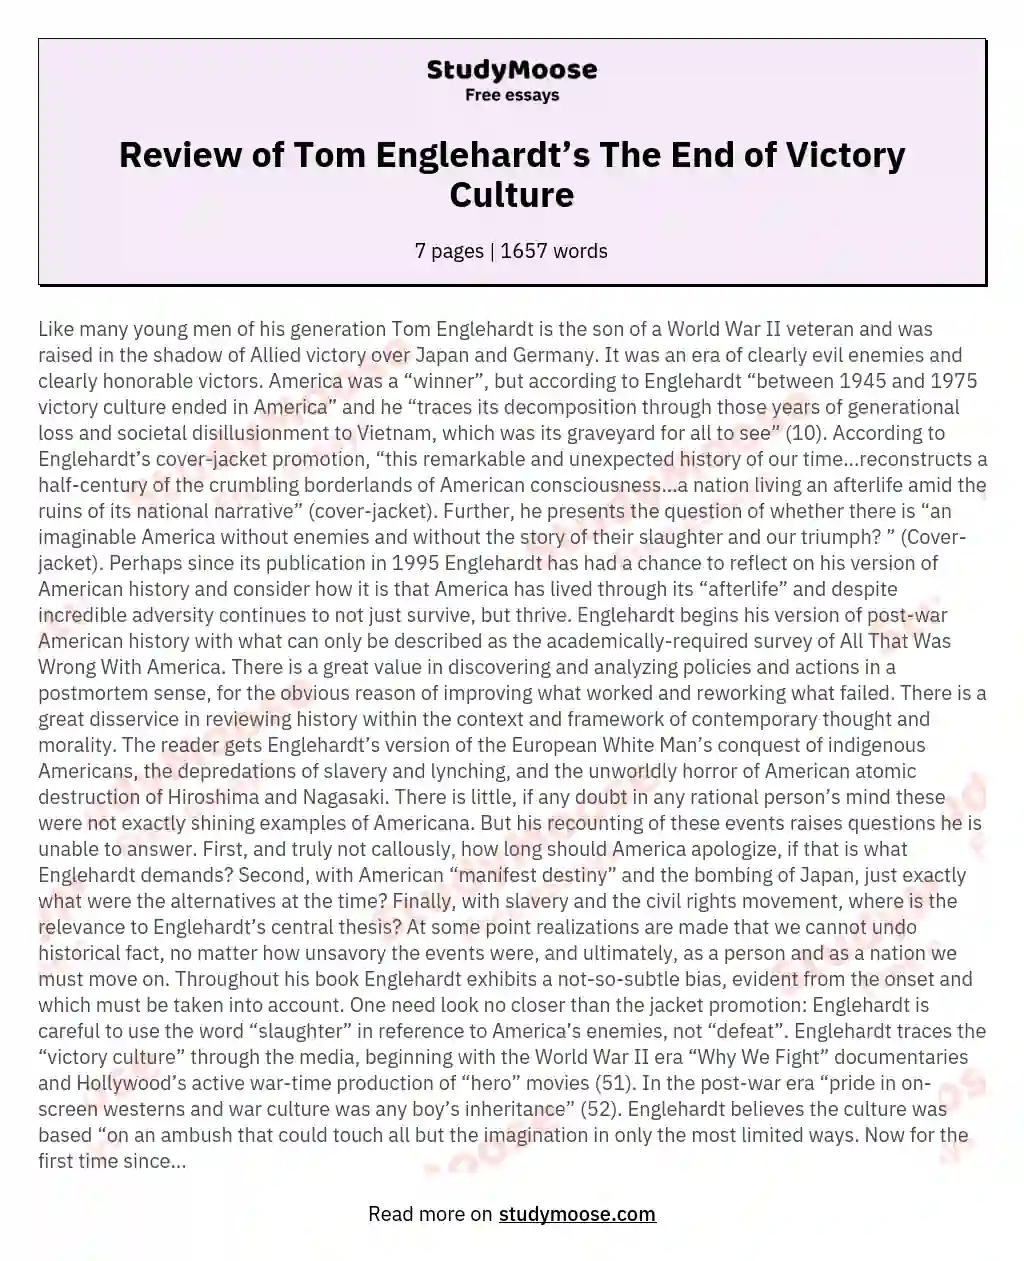 Review of Tom Englehardt’s The End of Victory Culture essay